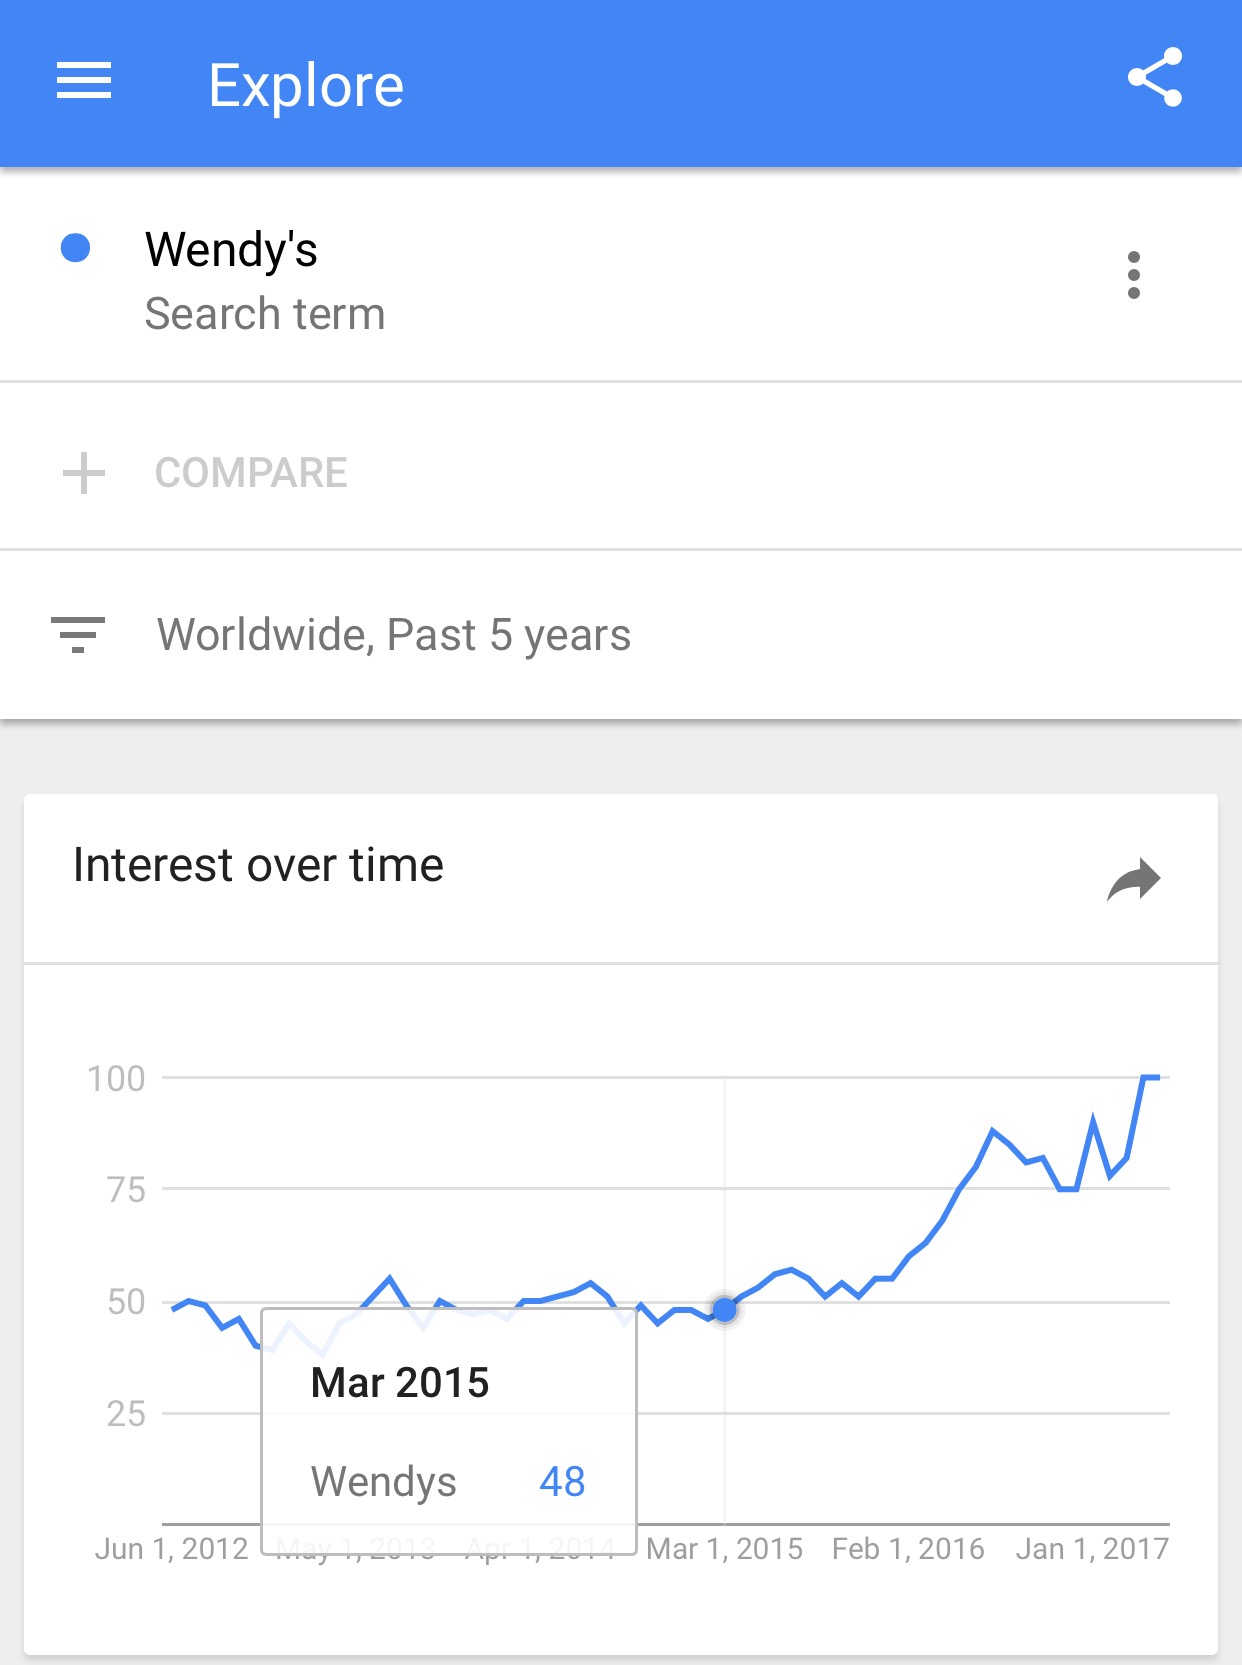 She was the reason of Wendy's sudden popularity in 2017.